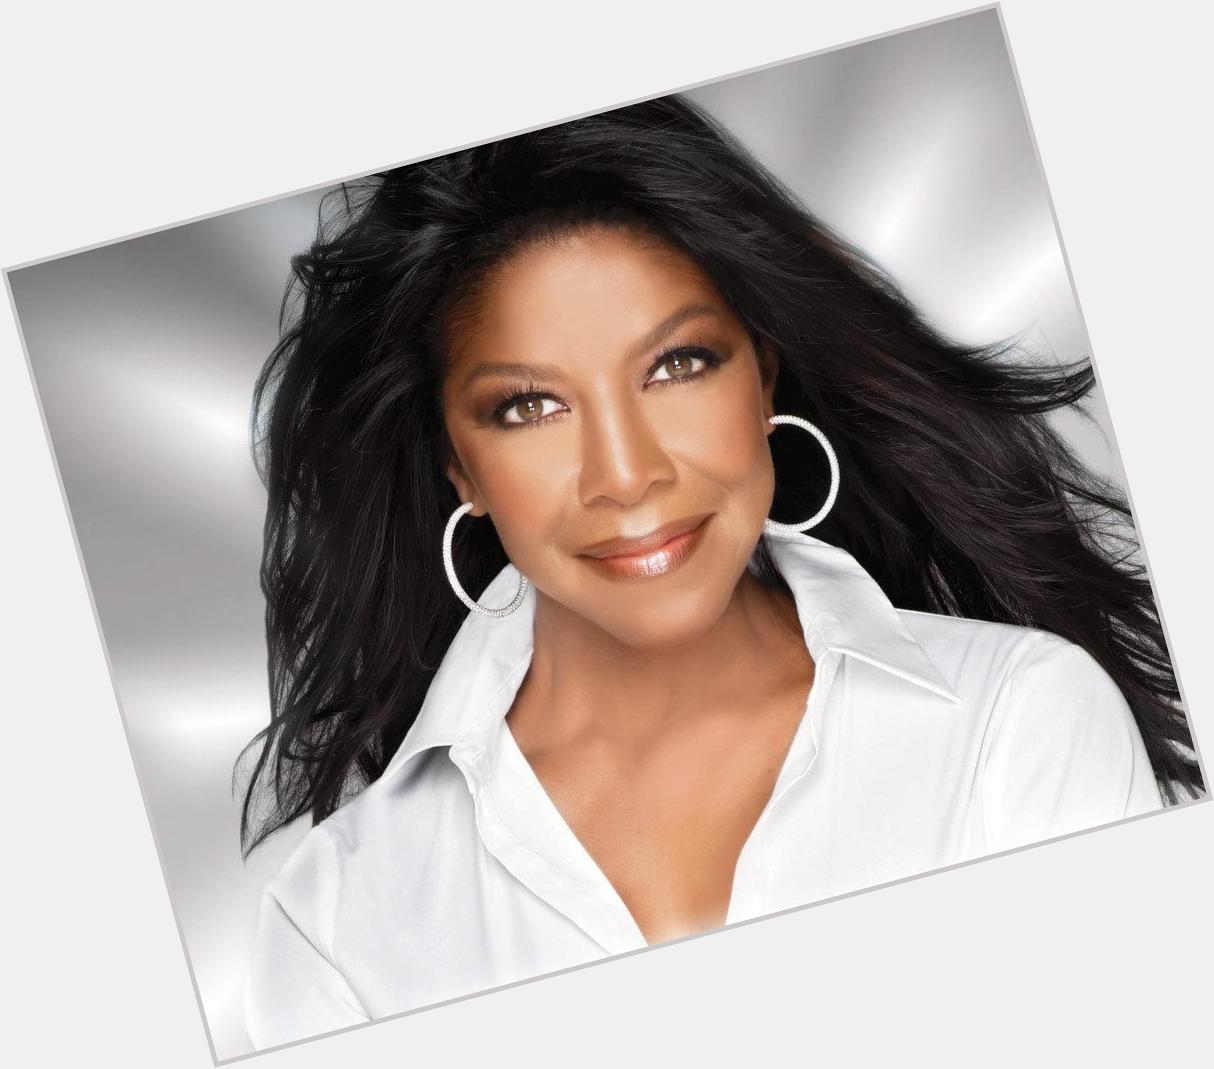 Happy Birthday To Natalie Cole!! She Is 65 Today!!   